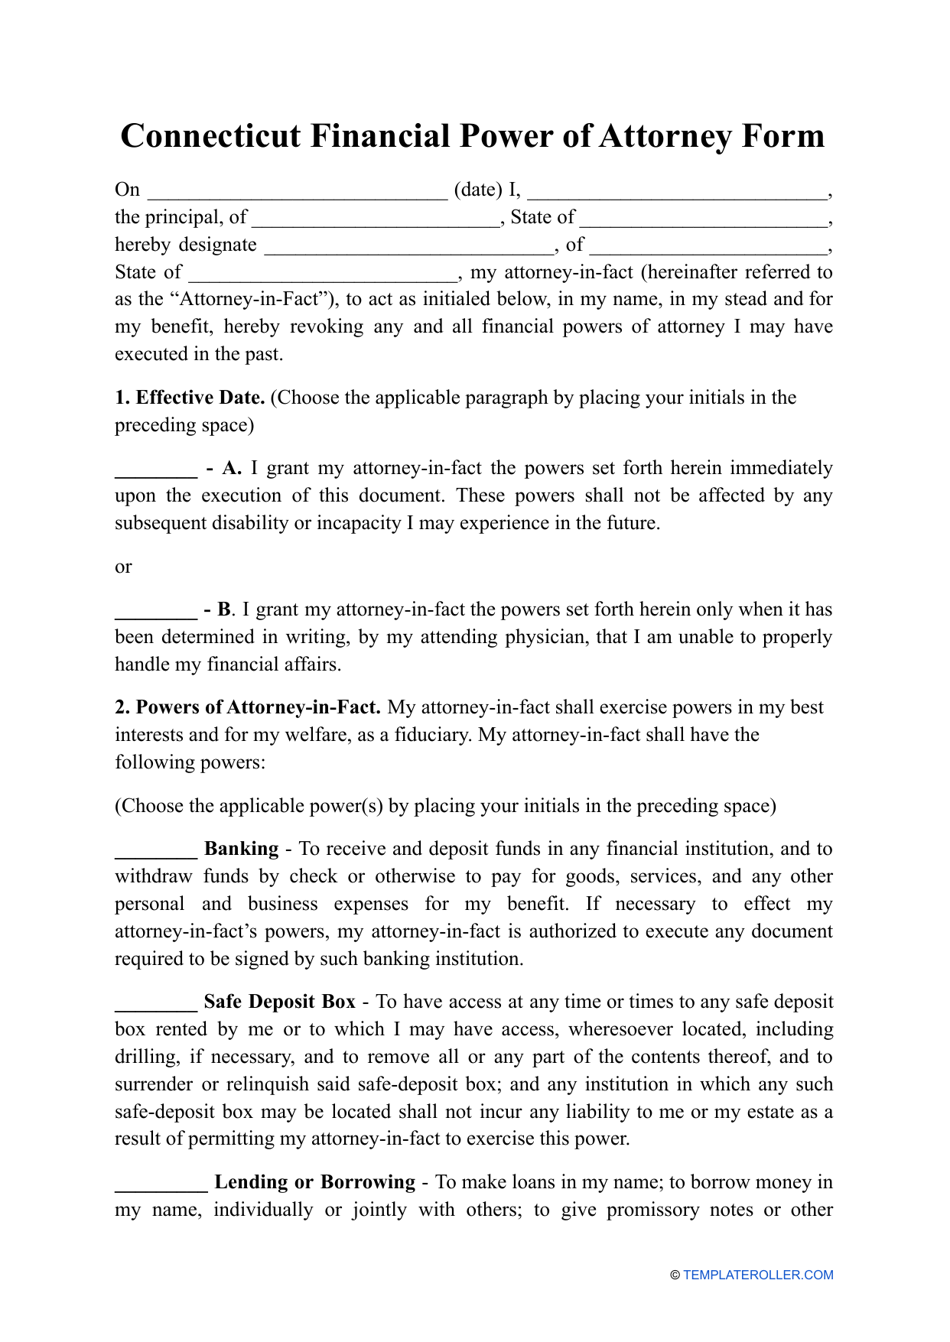 Financial Power of Attorney Form - Connecticut, Page 1